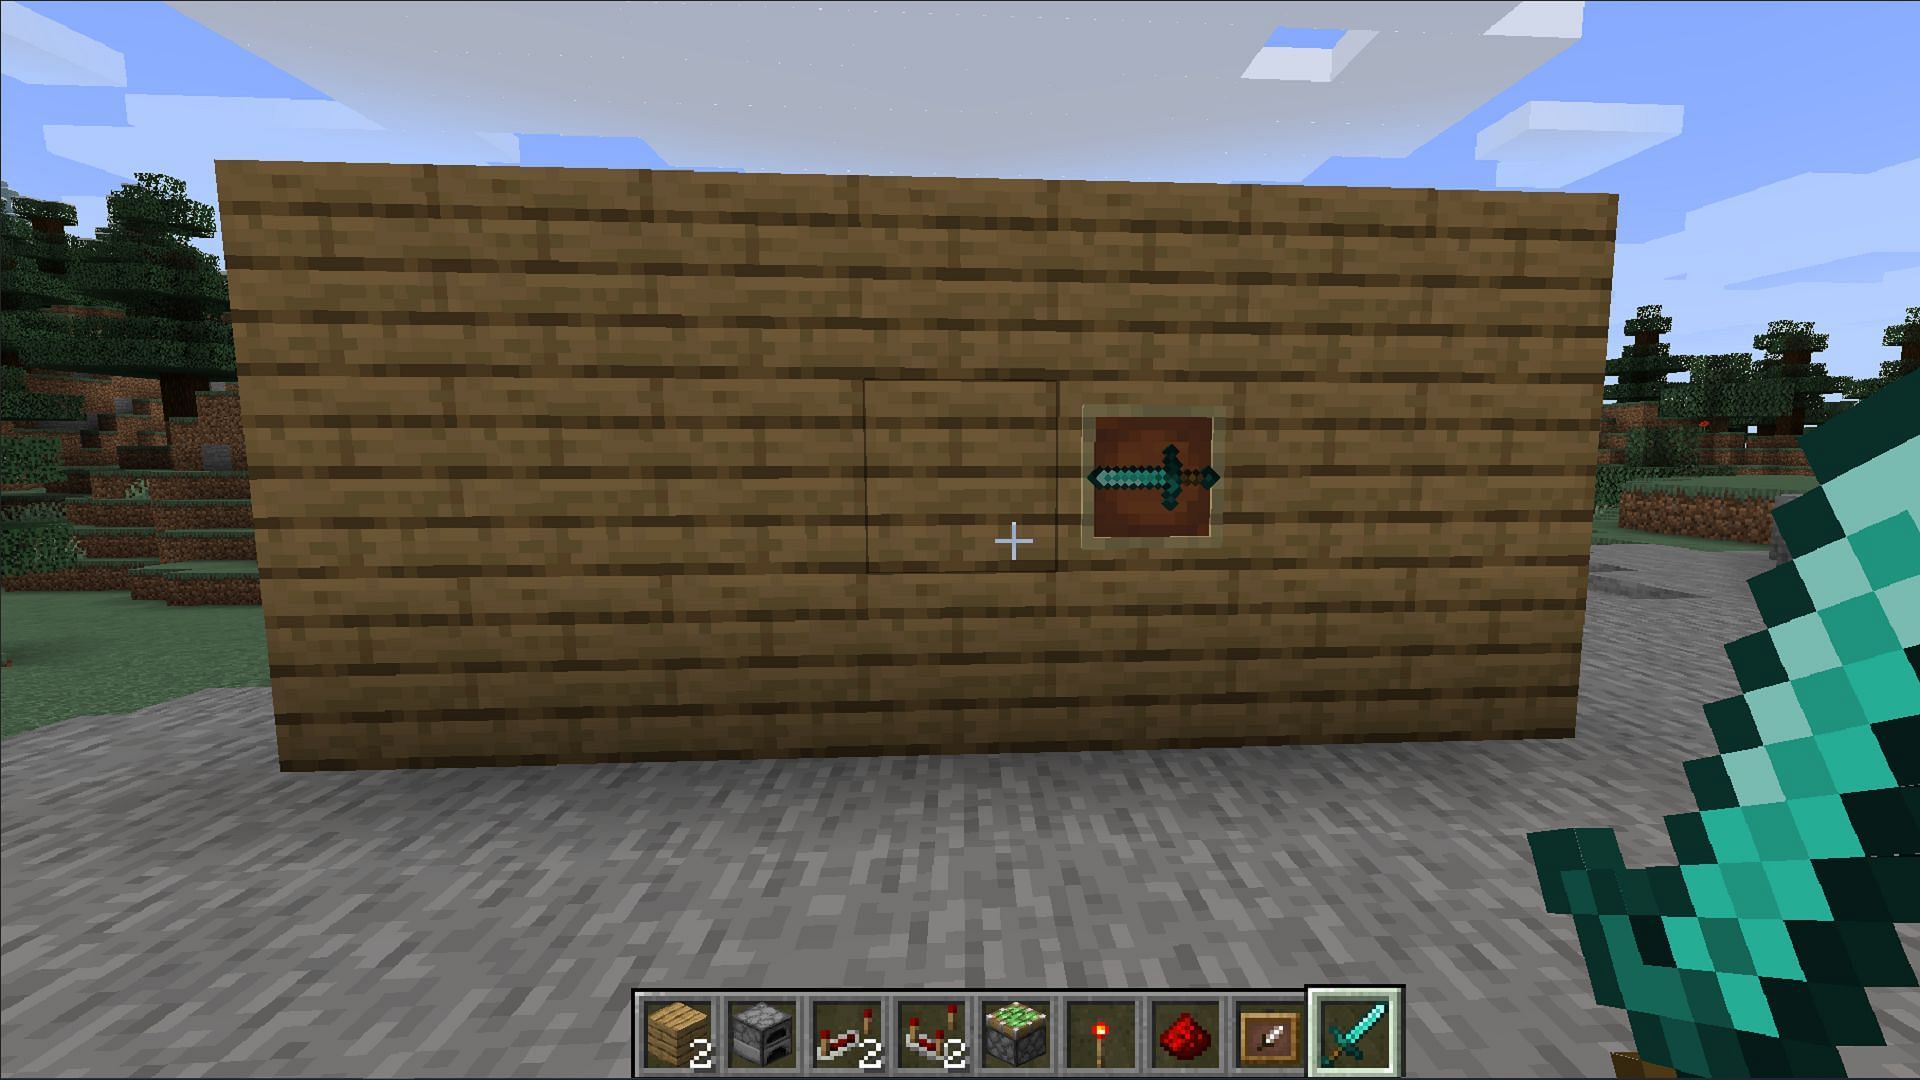 With a little redstone, you can keep your items safe in plain sight (Image via Mojang)